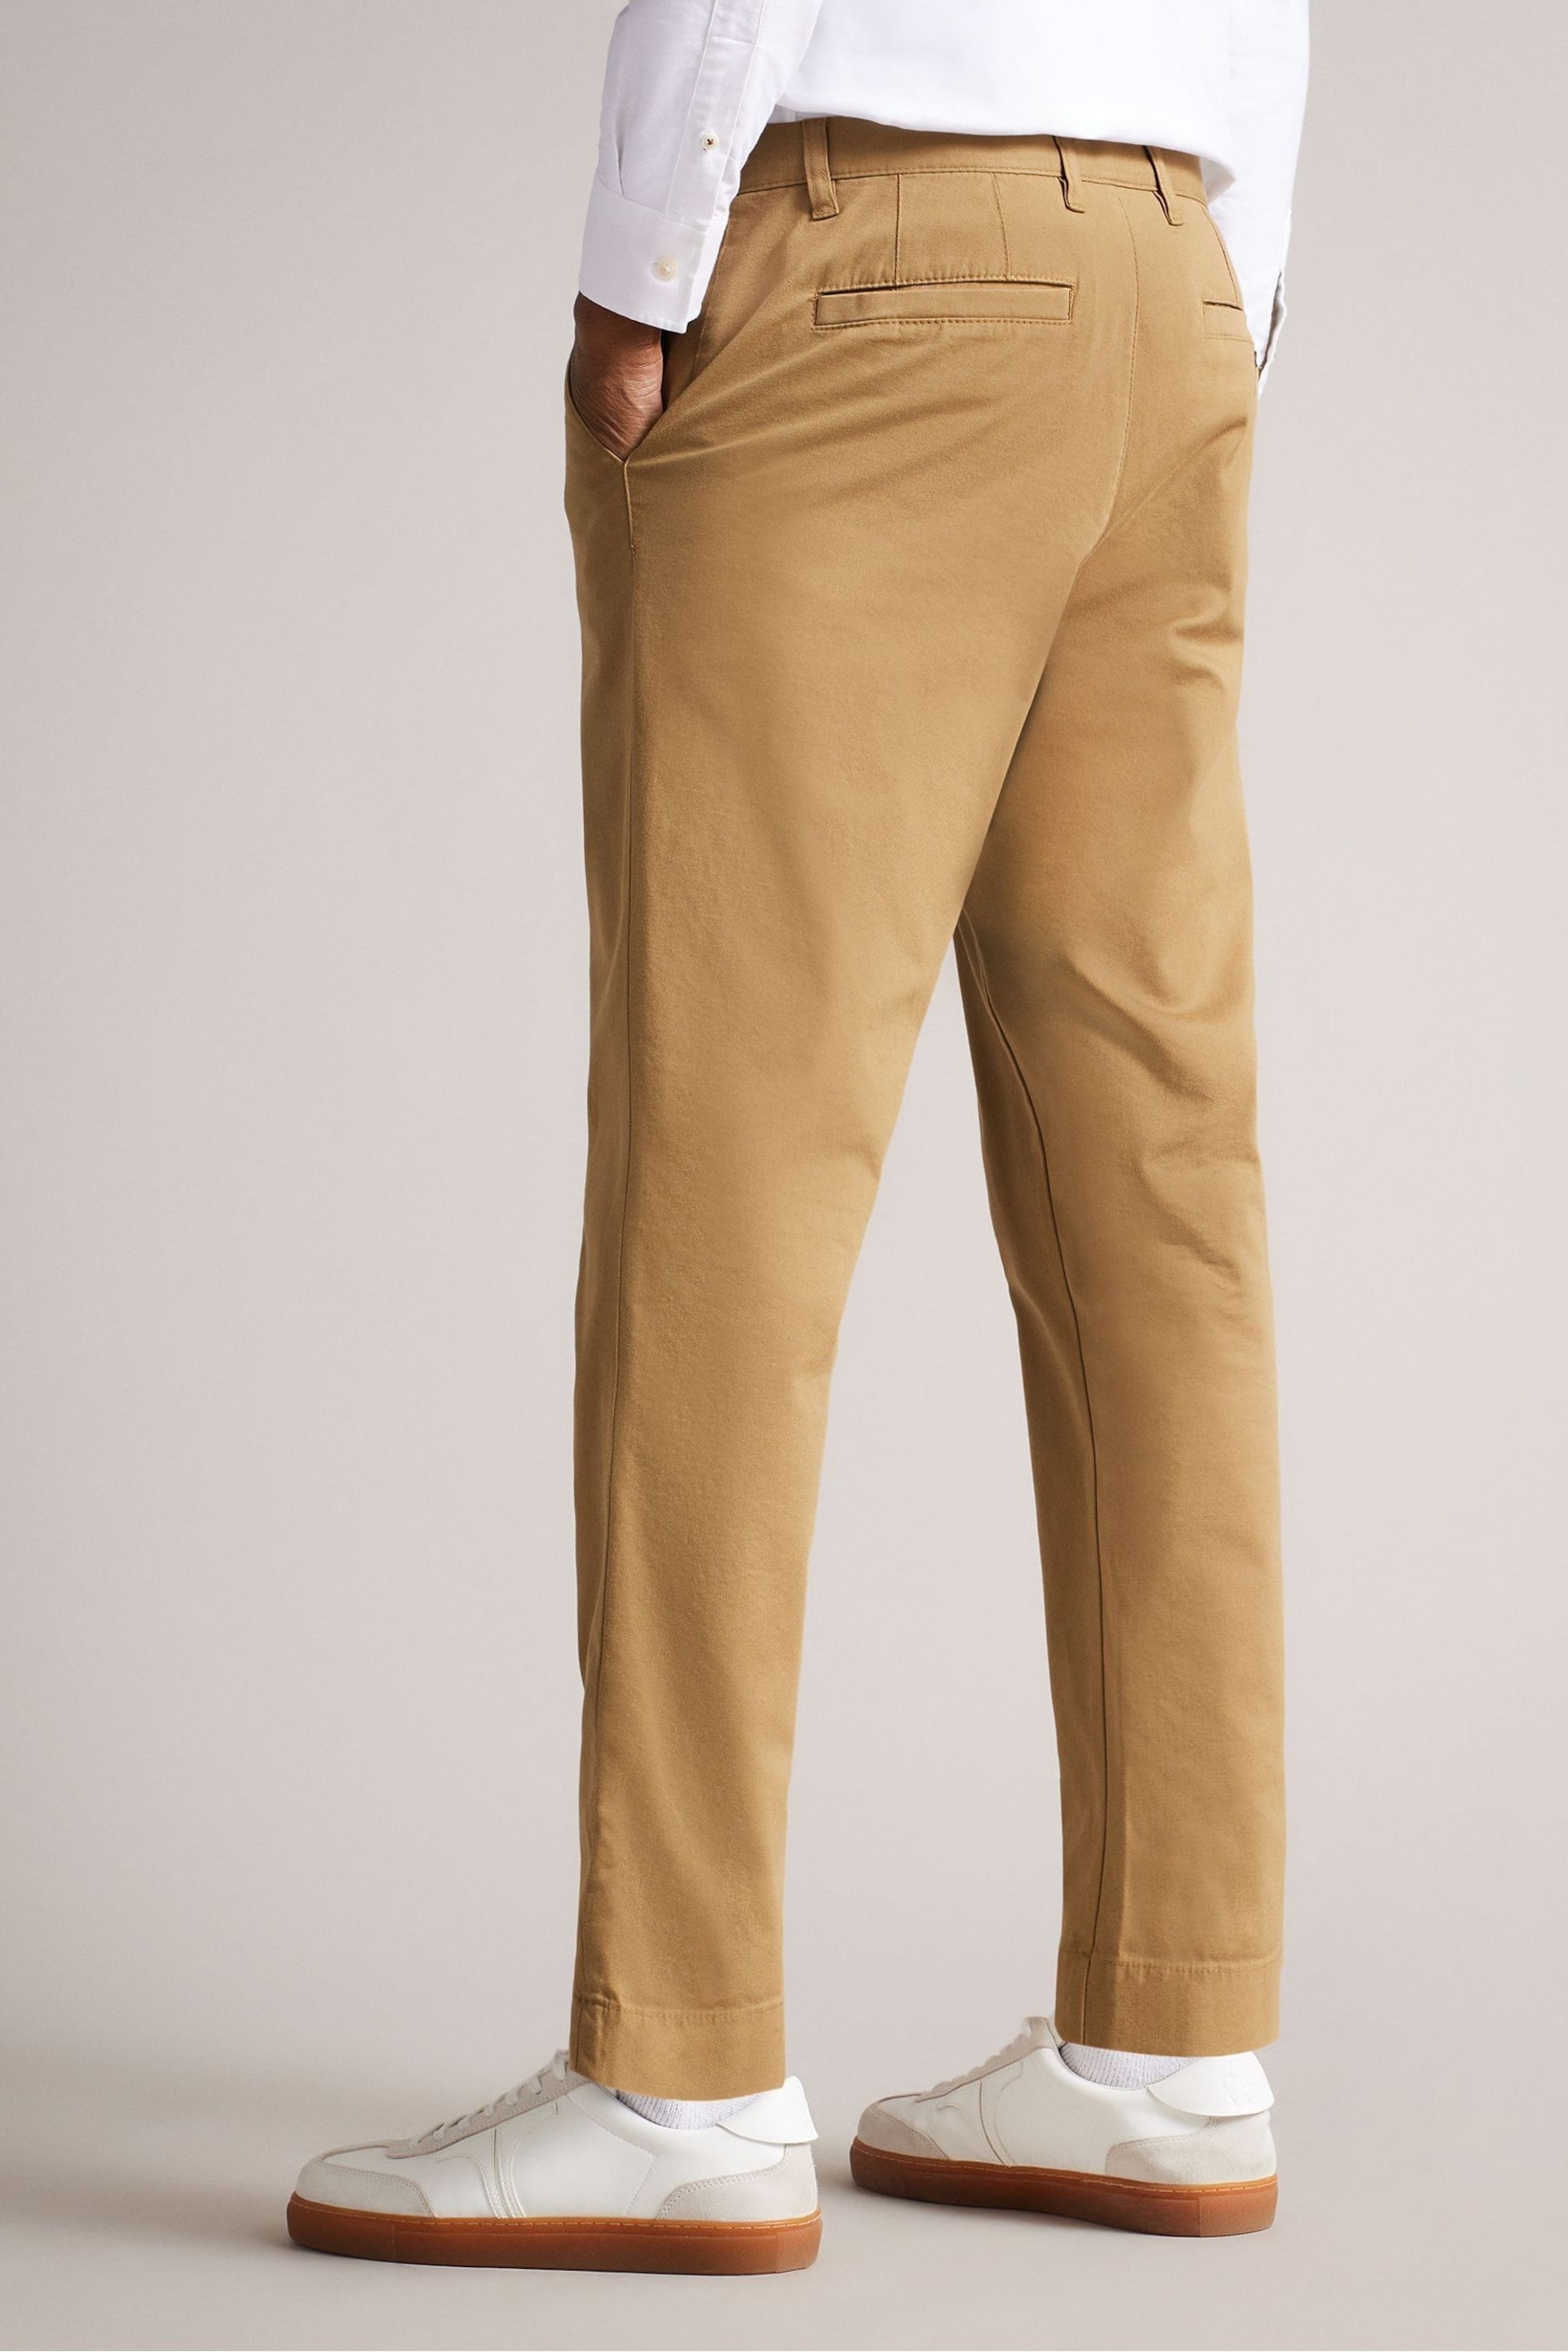 Ted Baker Natural Genbee Casual Relaxed Chinos - Image 2 of 6